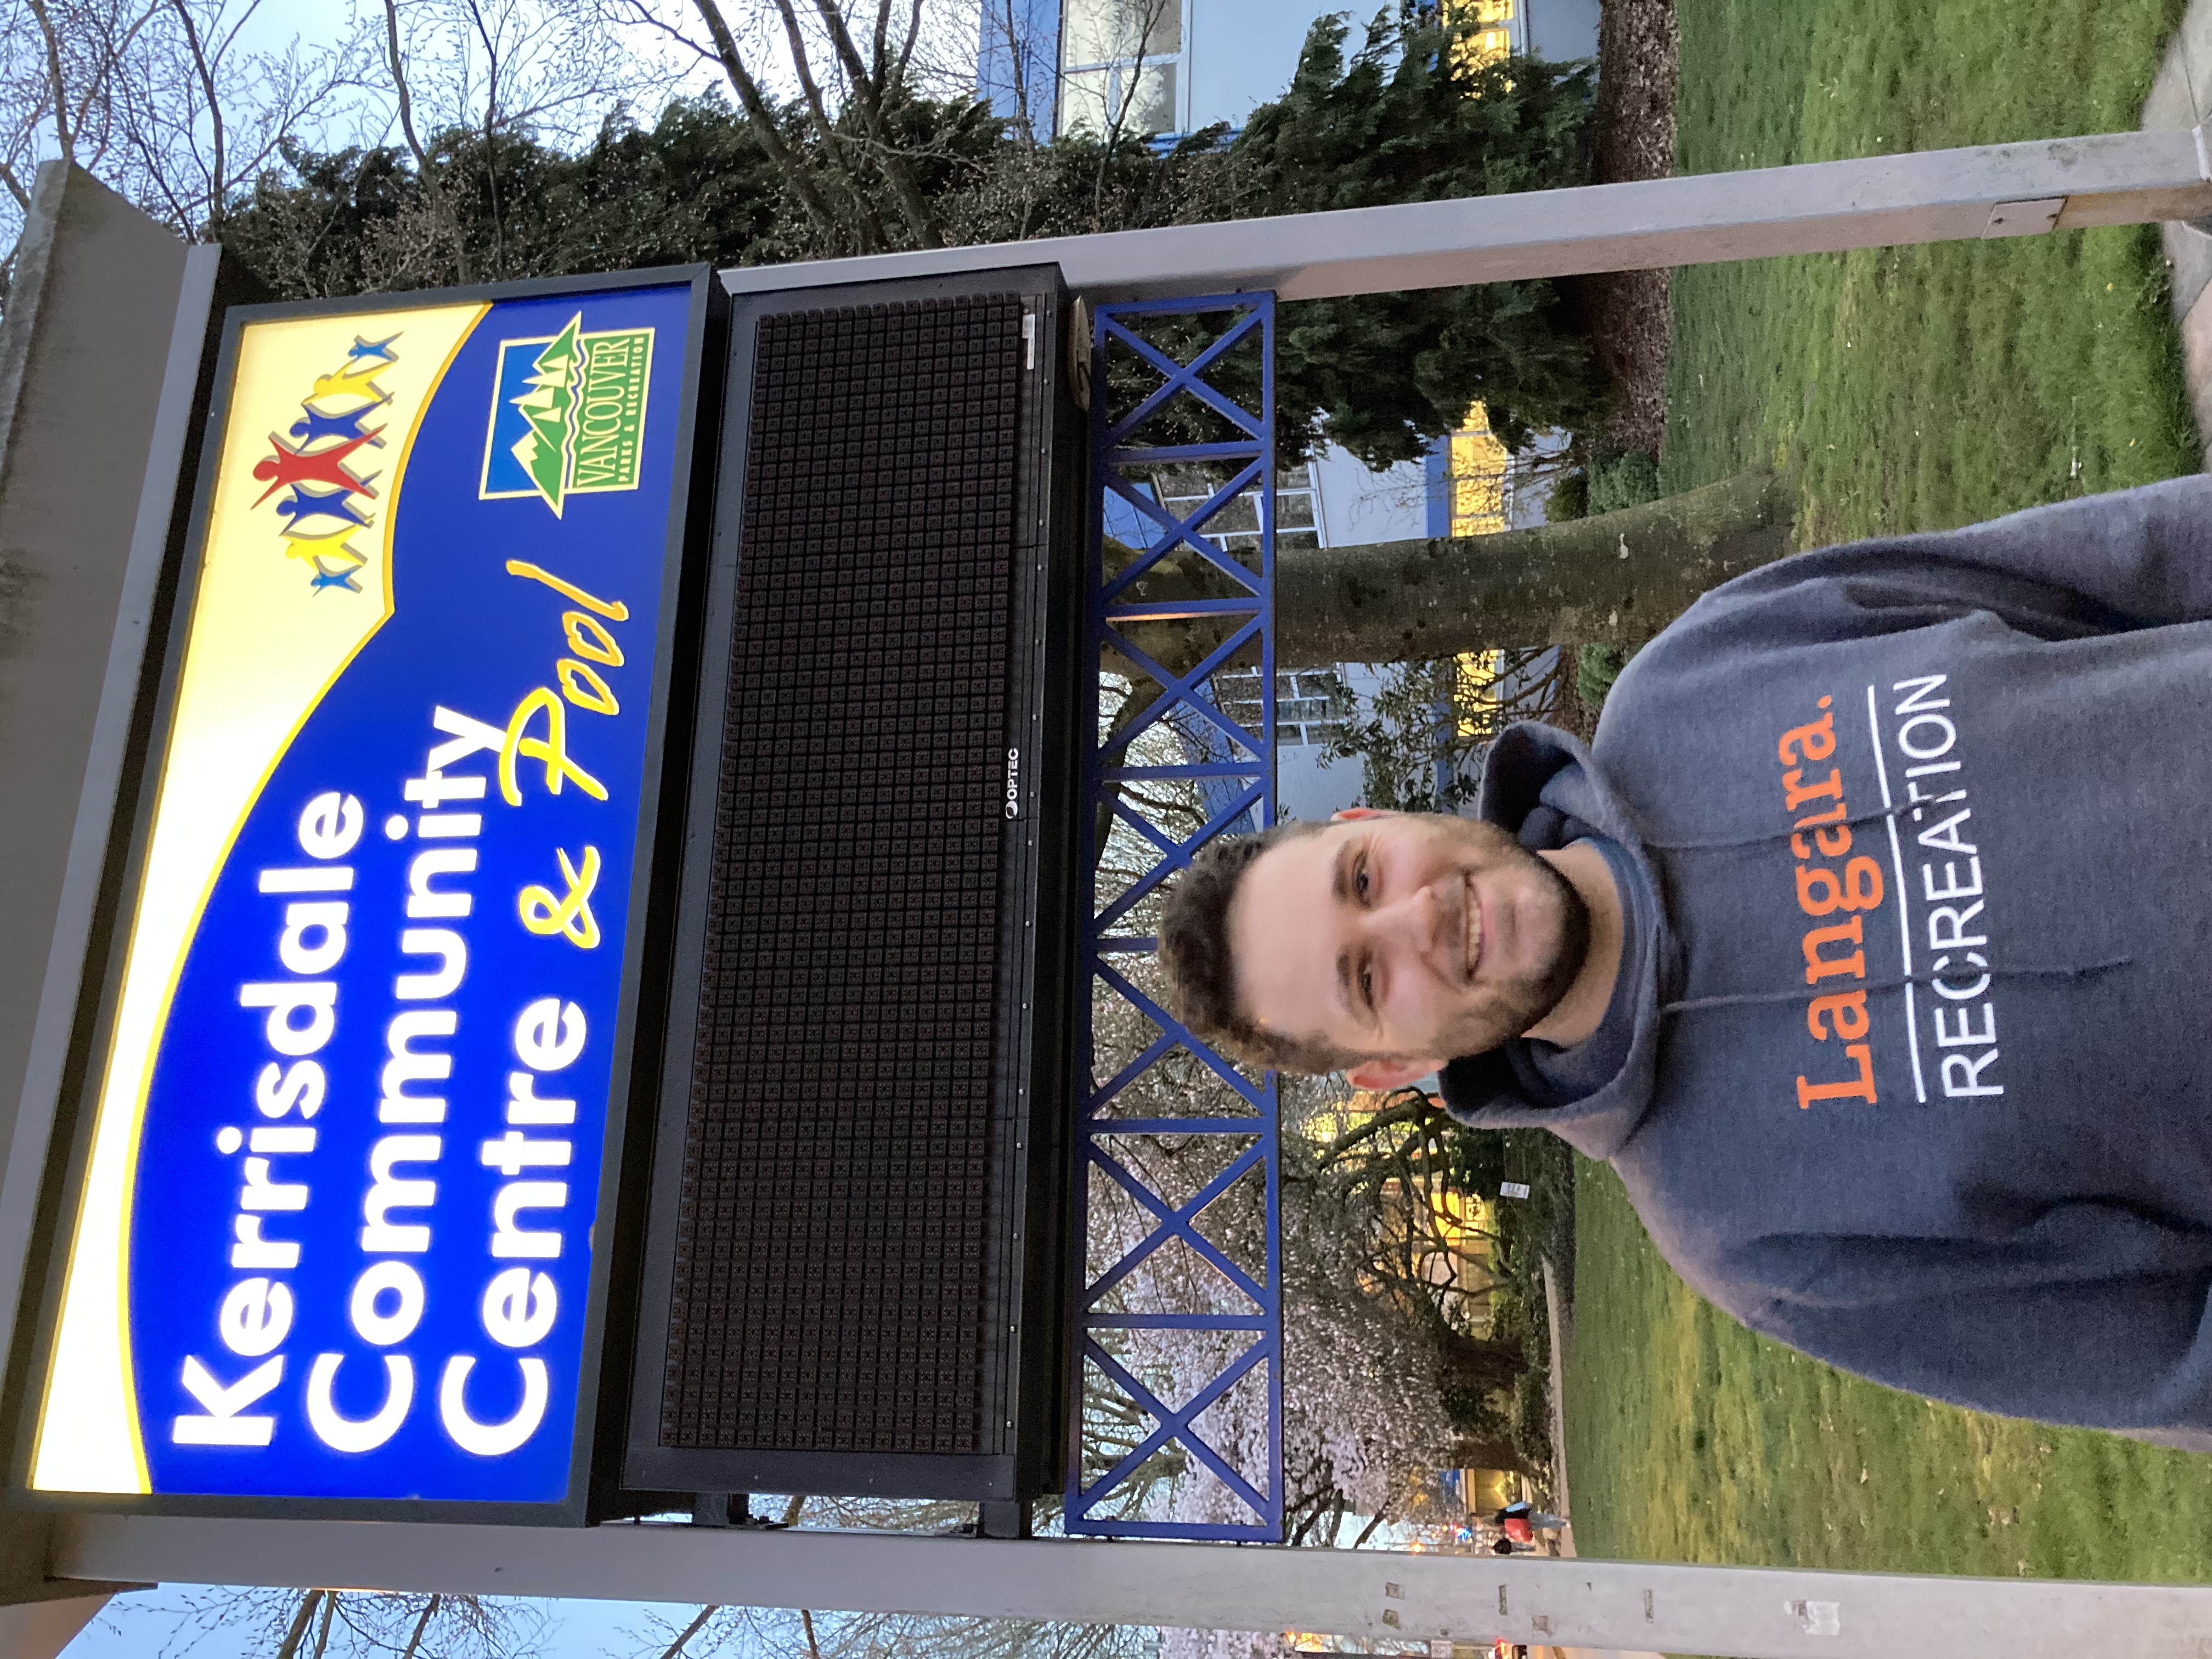 Man smiling below a sign that reads Kerrisdale Community Centre & Pool